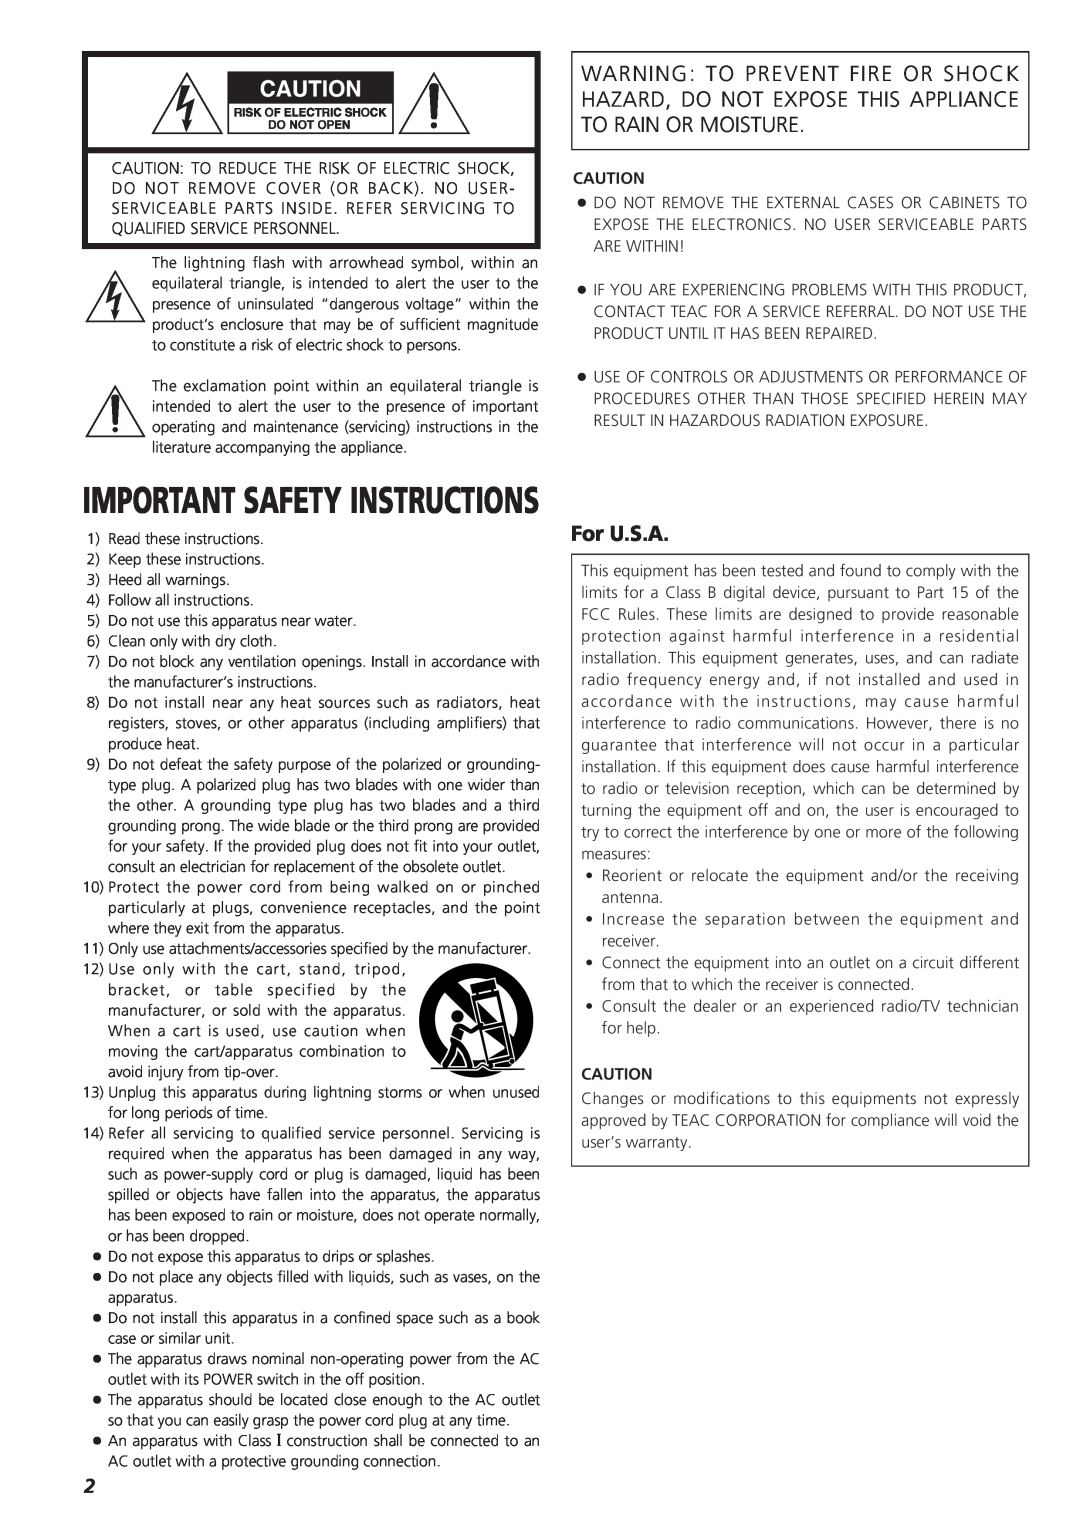 Teac X-03SE manual For U.S.A, Important Safety Instructions 